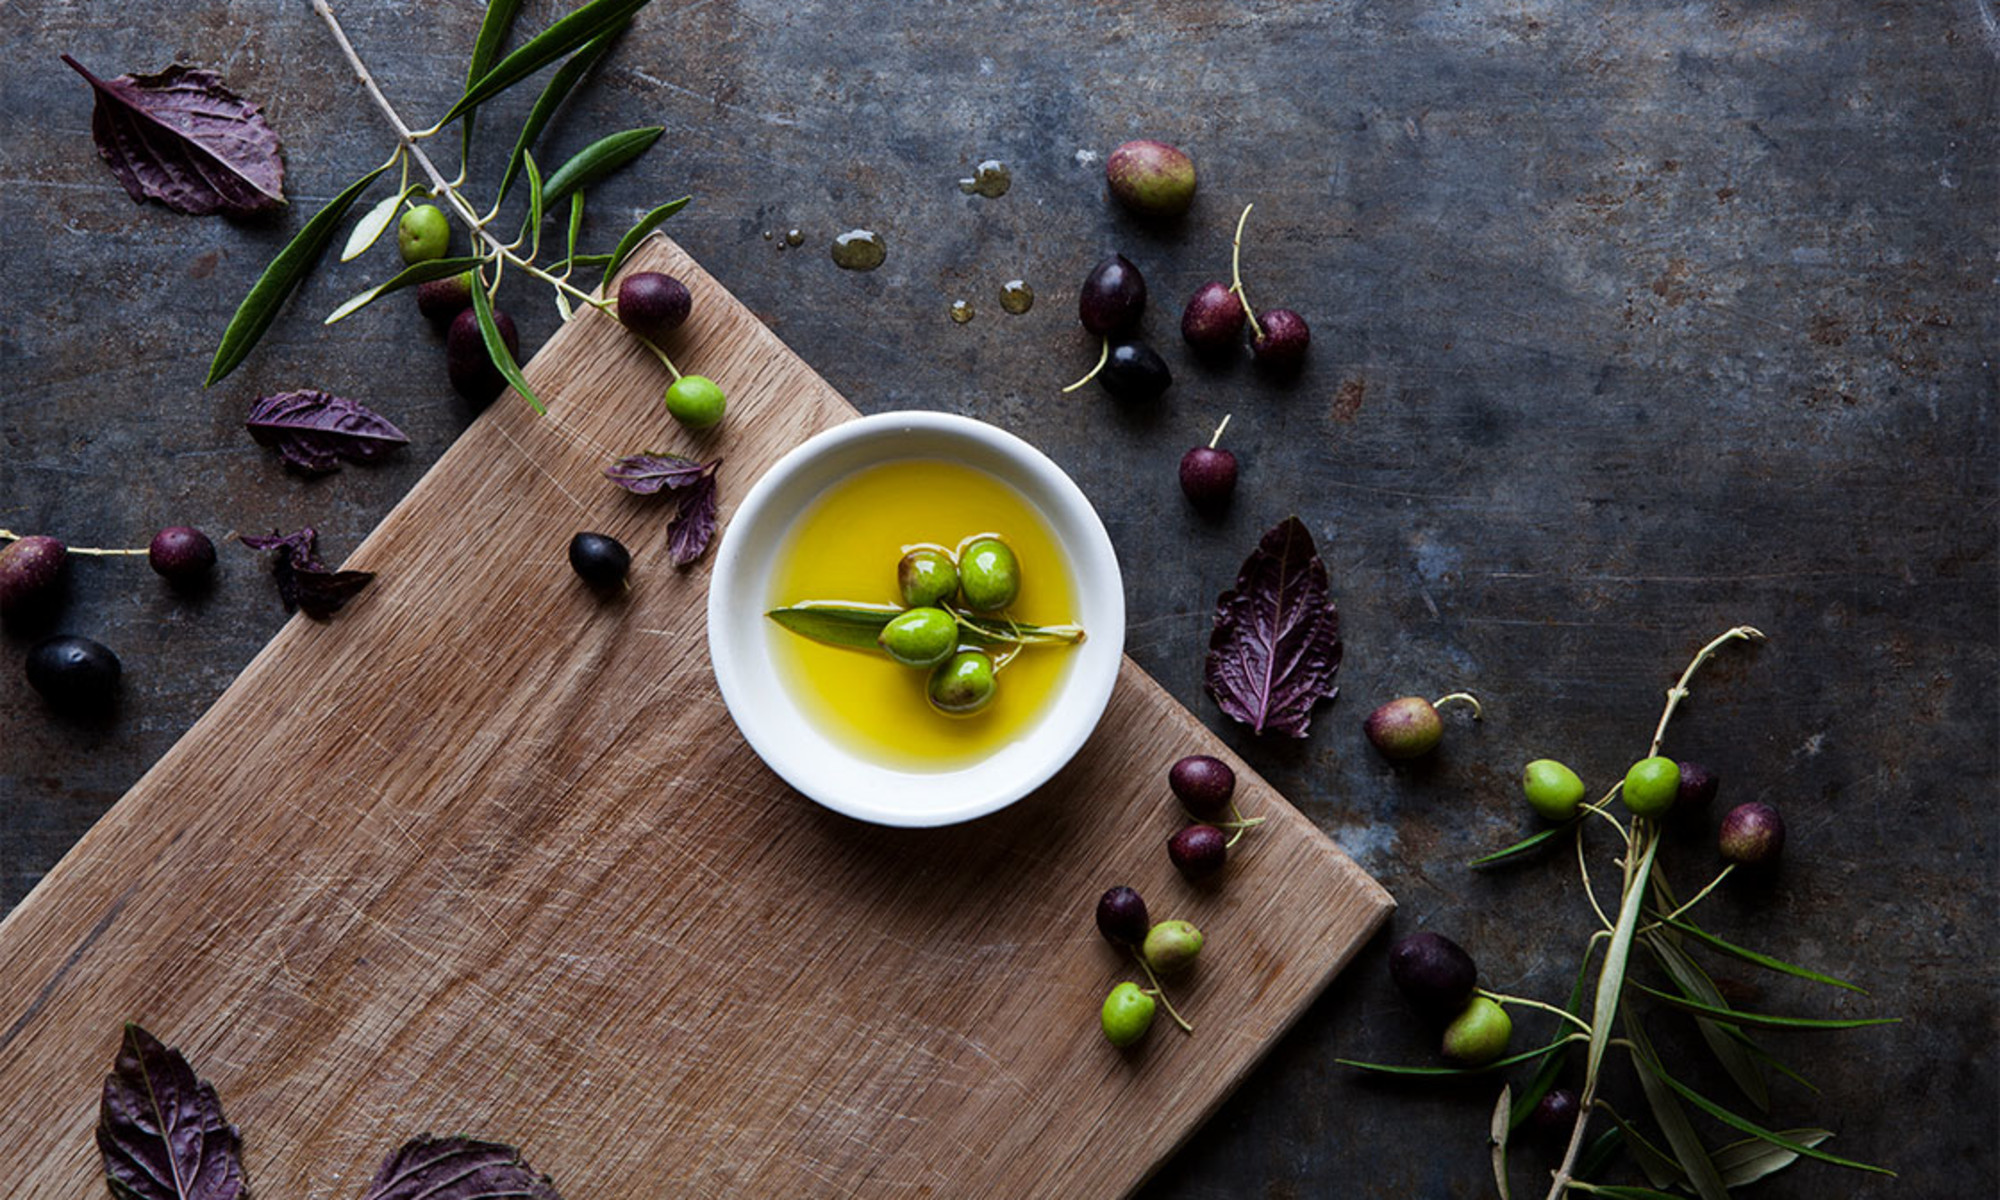 Are Olives Good for You? 5 Health Benefits, According to